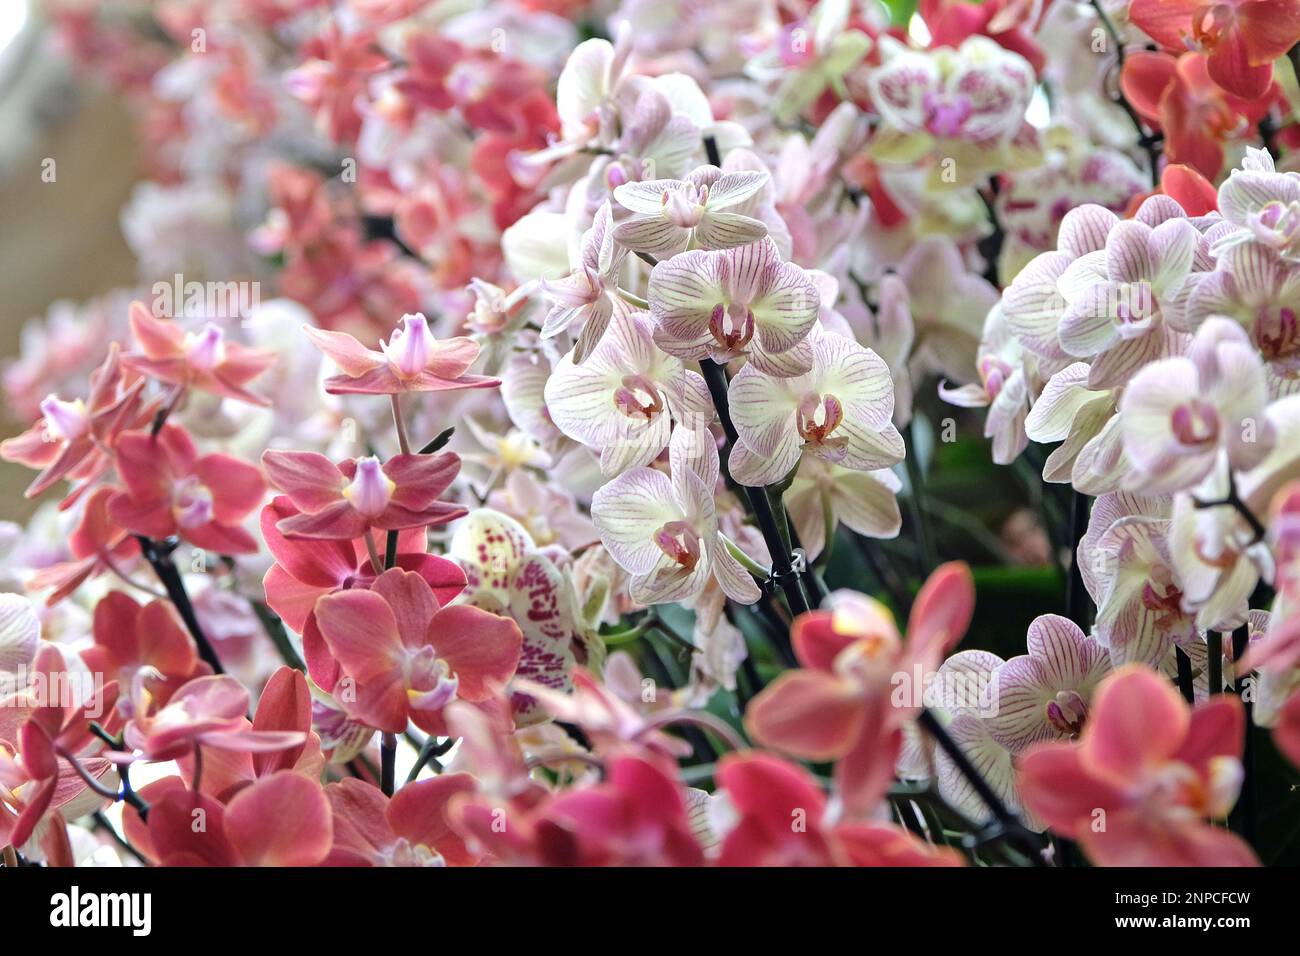 Cream and pink striped phalaenopsis moth orchids in flower. Stock Photo